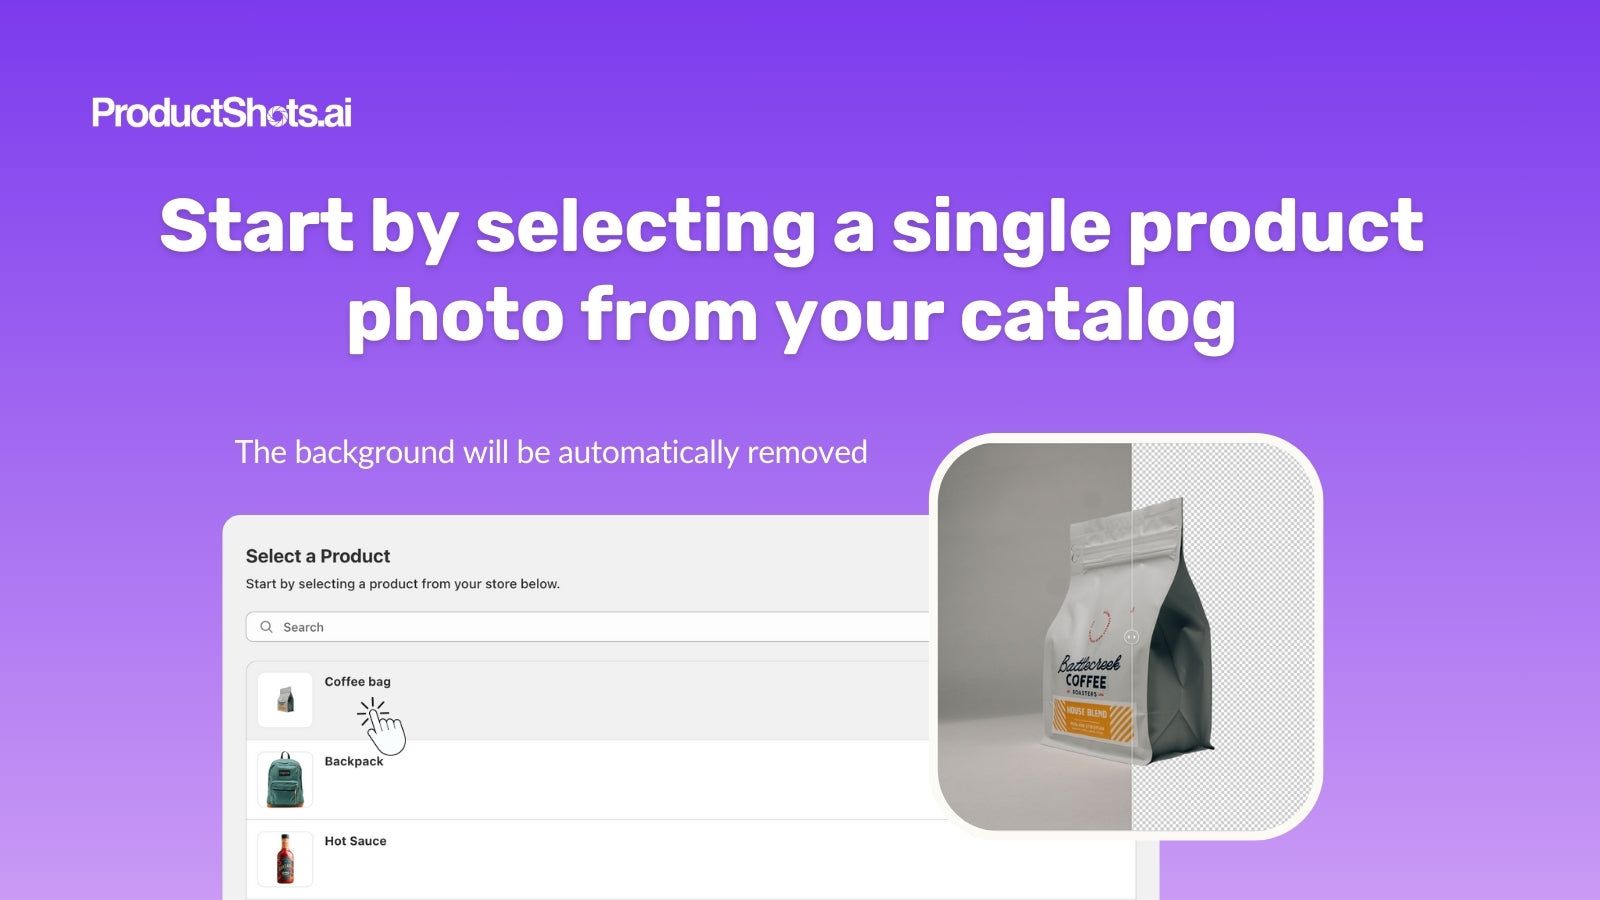 Start by selectecting a photo from your catalog